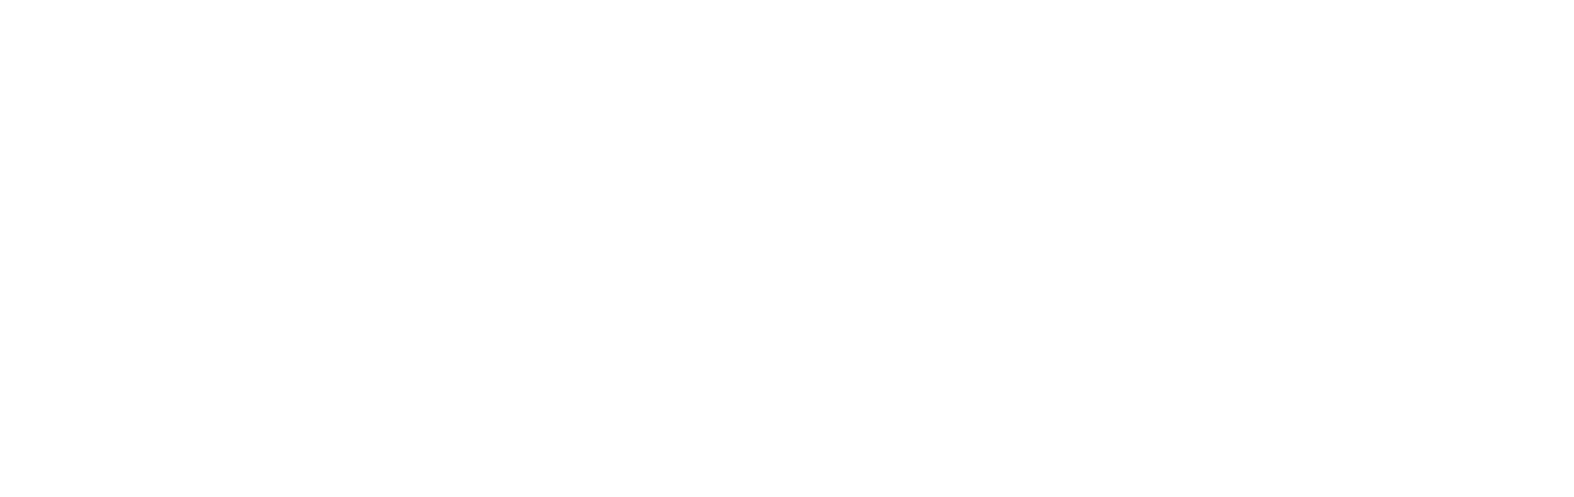 CorpHousing Group logo large for dark backgrounds (transparent PNG)